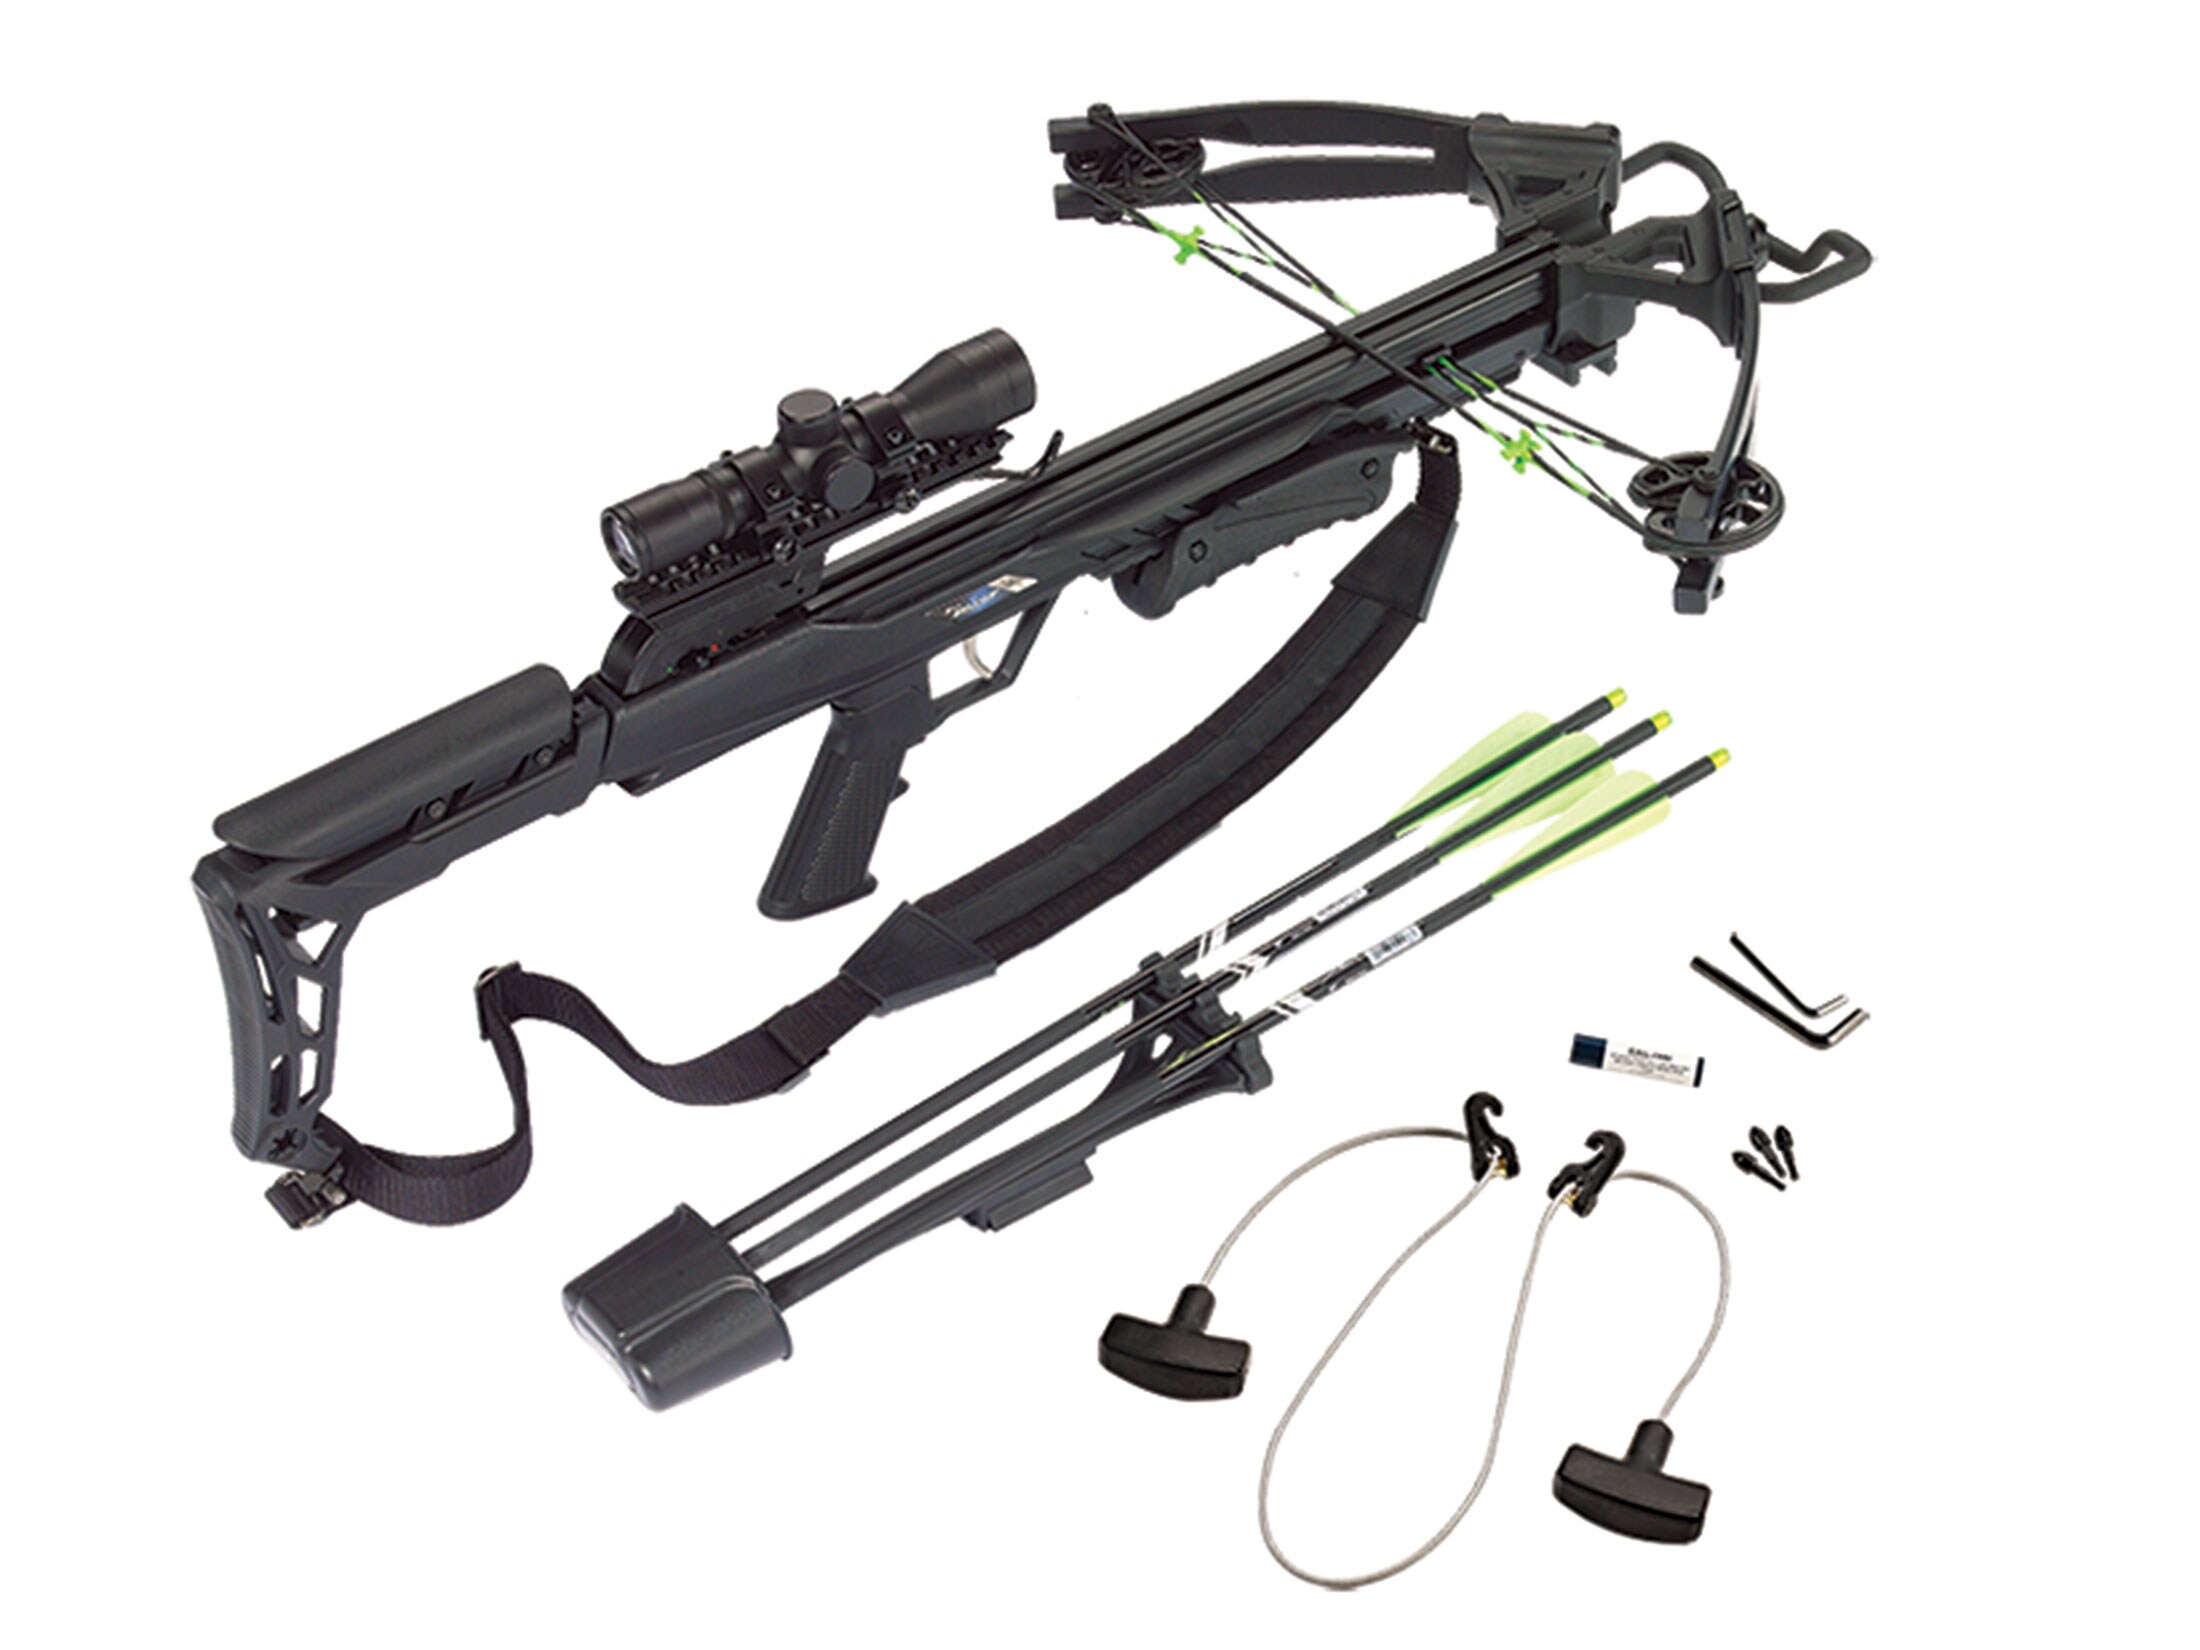 Carbon Express Blade Crossbow Package